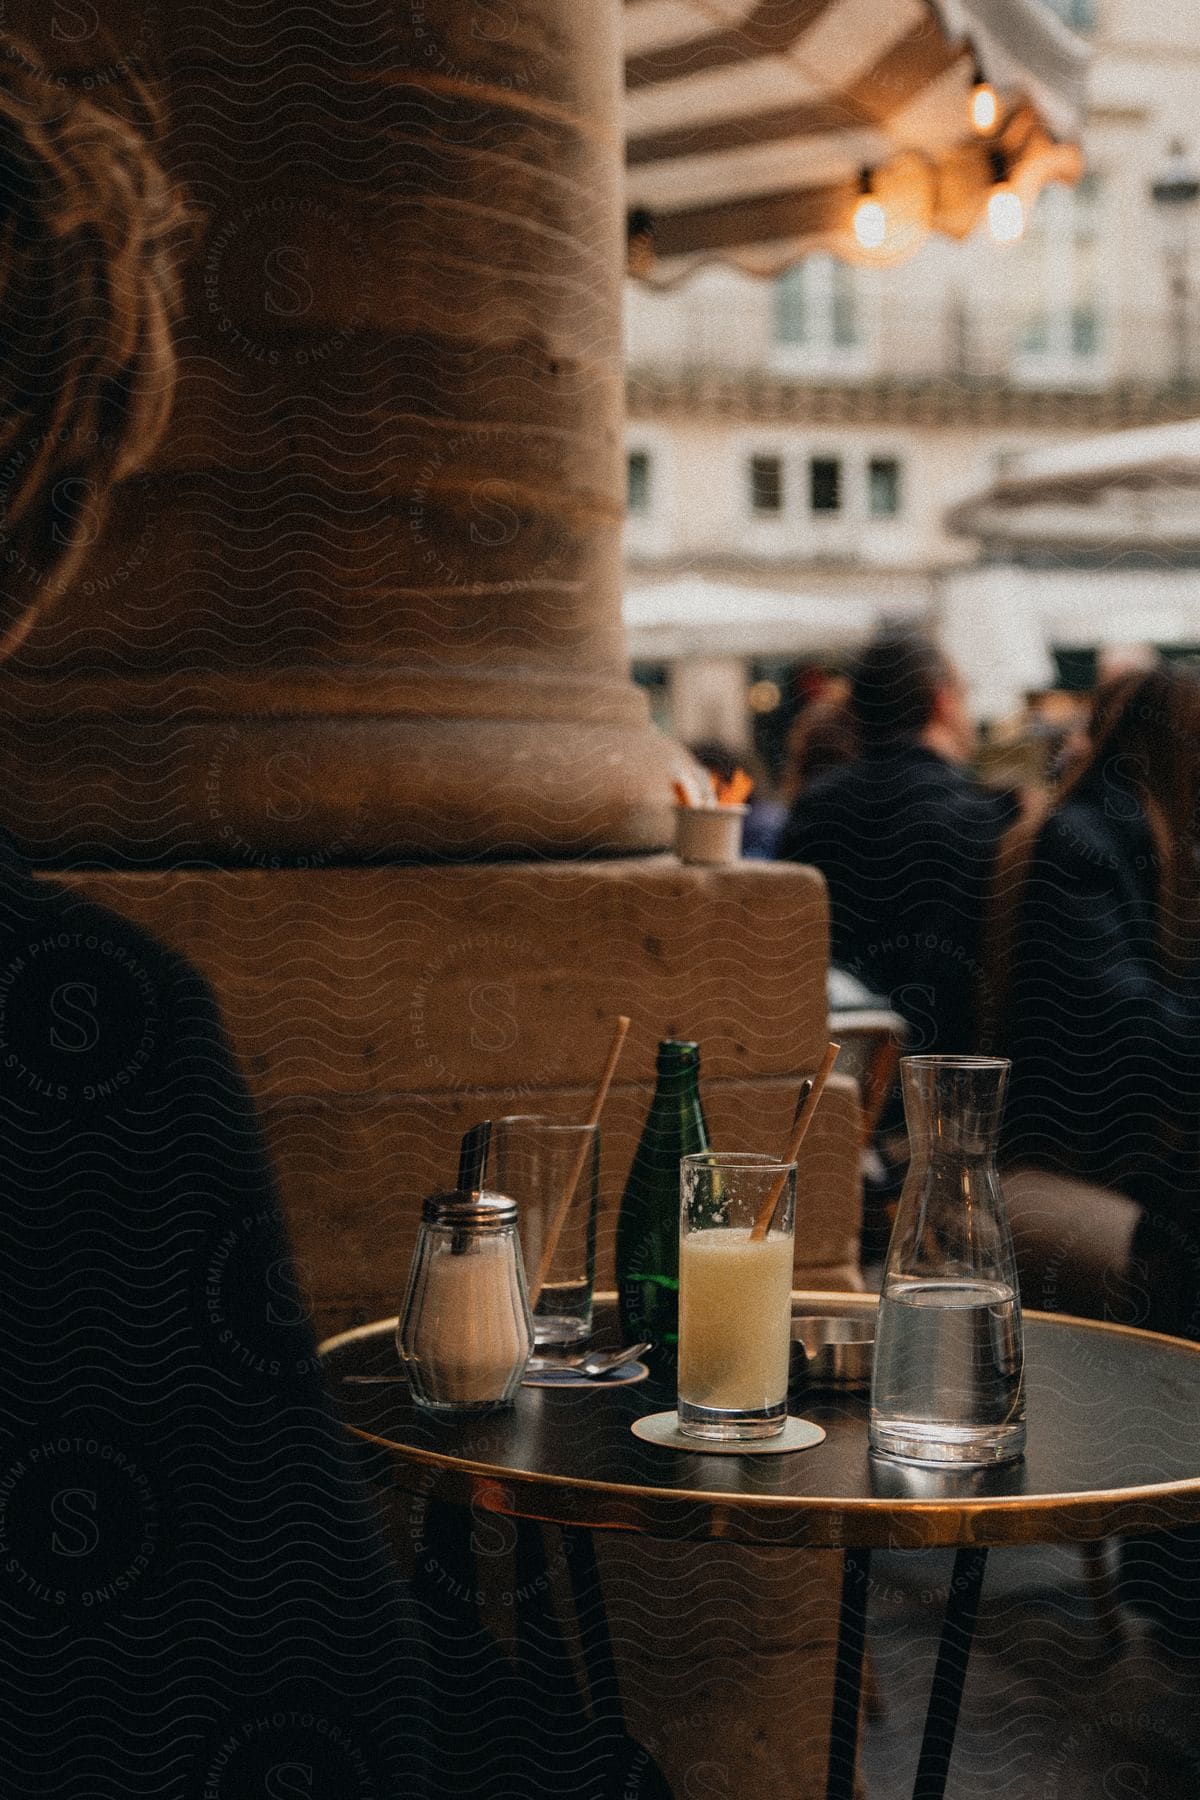 Outdoor café table with a glass of juice, a bottle of water, and a sugar dispenser in front of a stone pillar, with blurred people in the background.